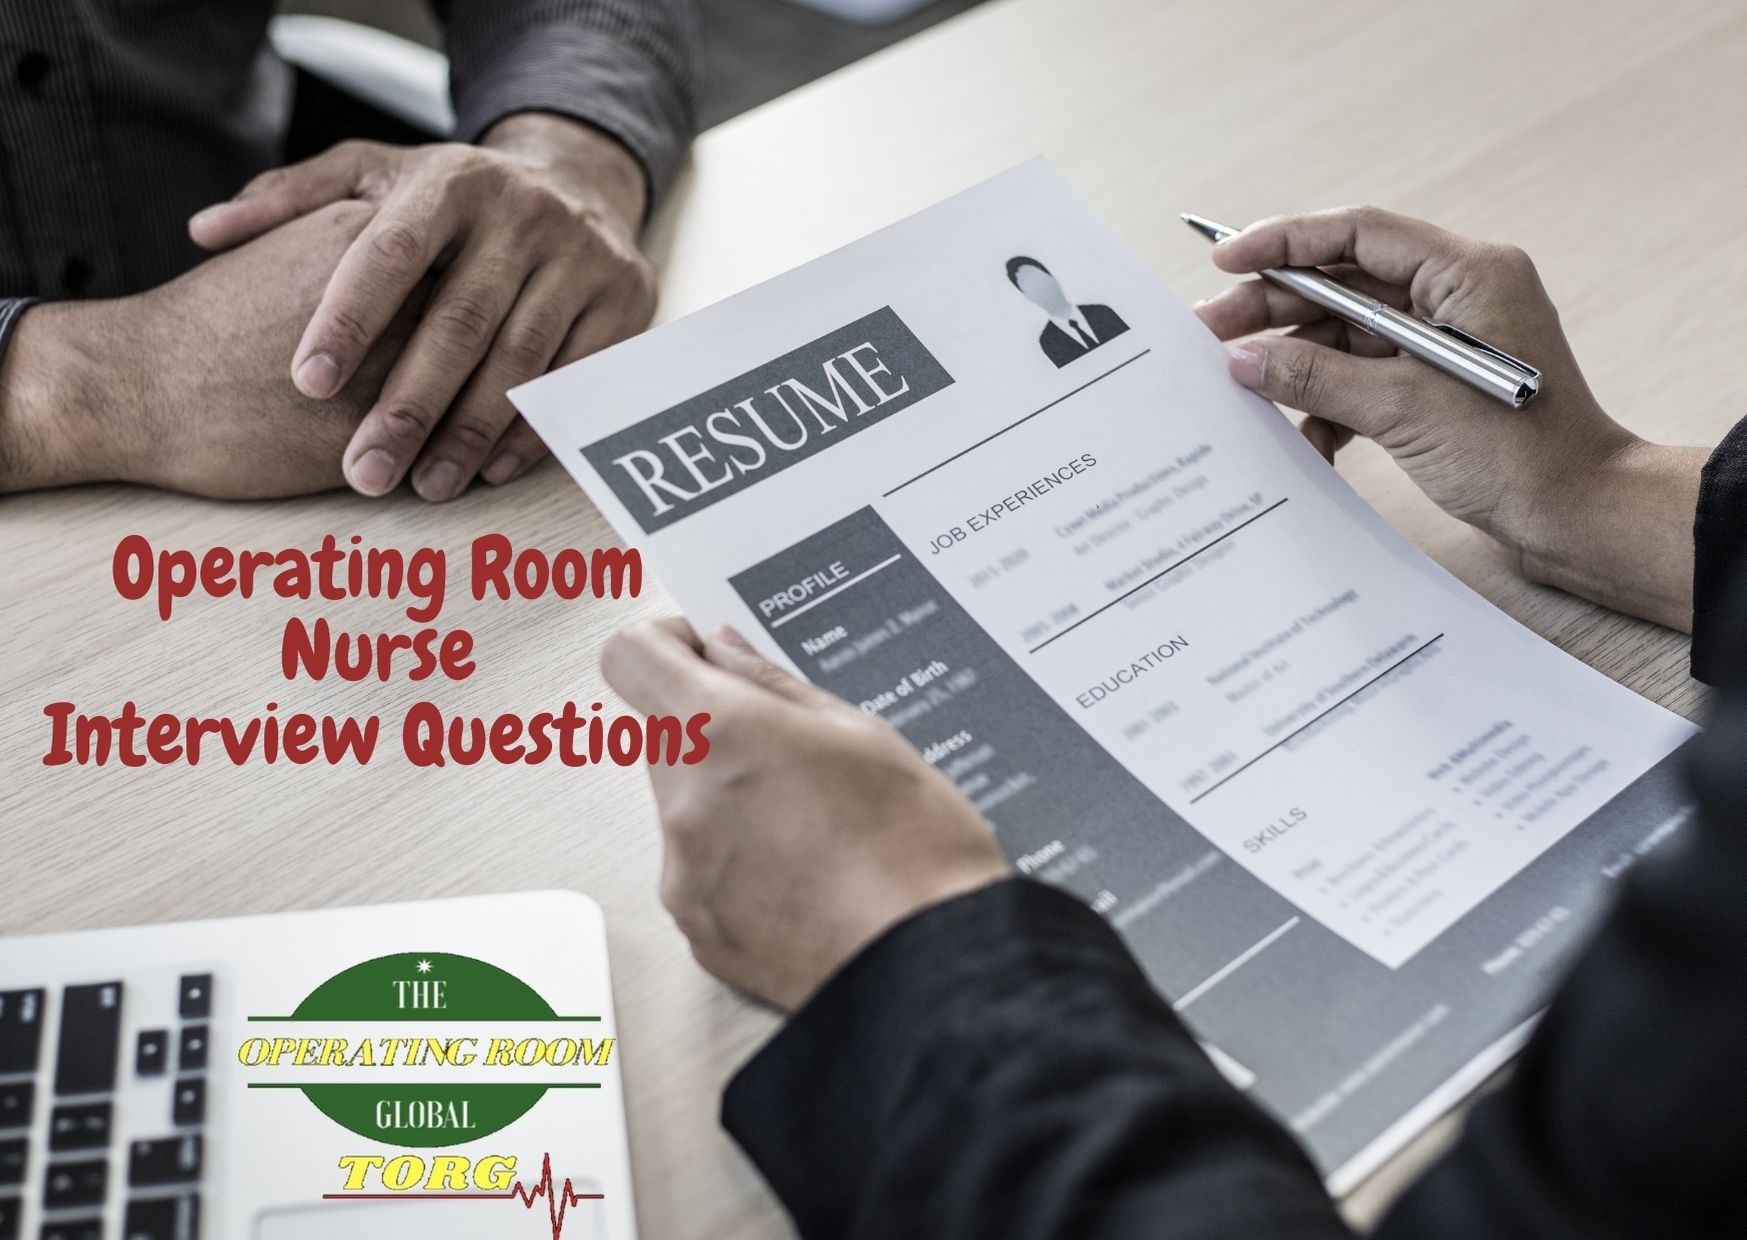 Common Operating Room Nurse Interview Questions & Answers